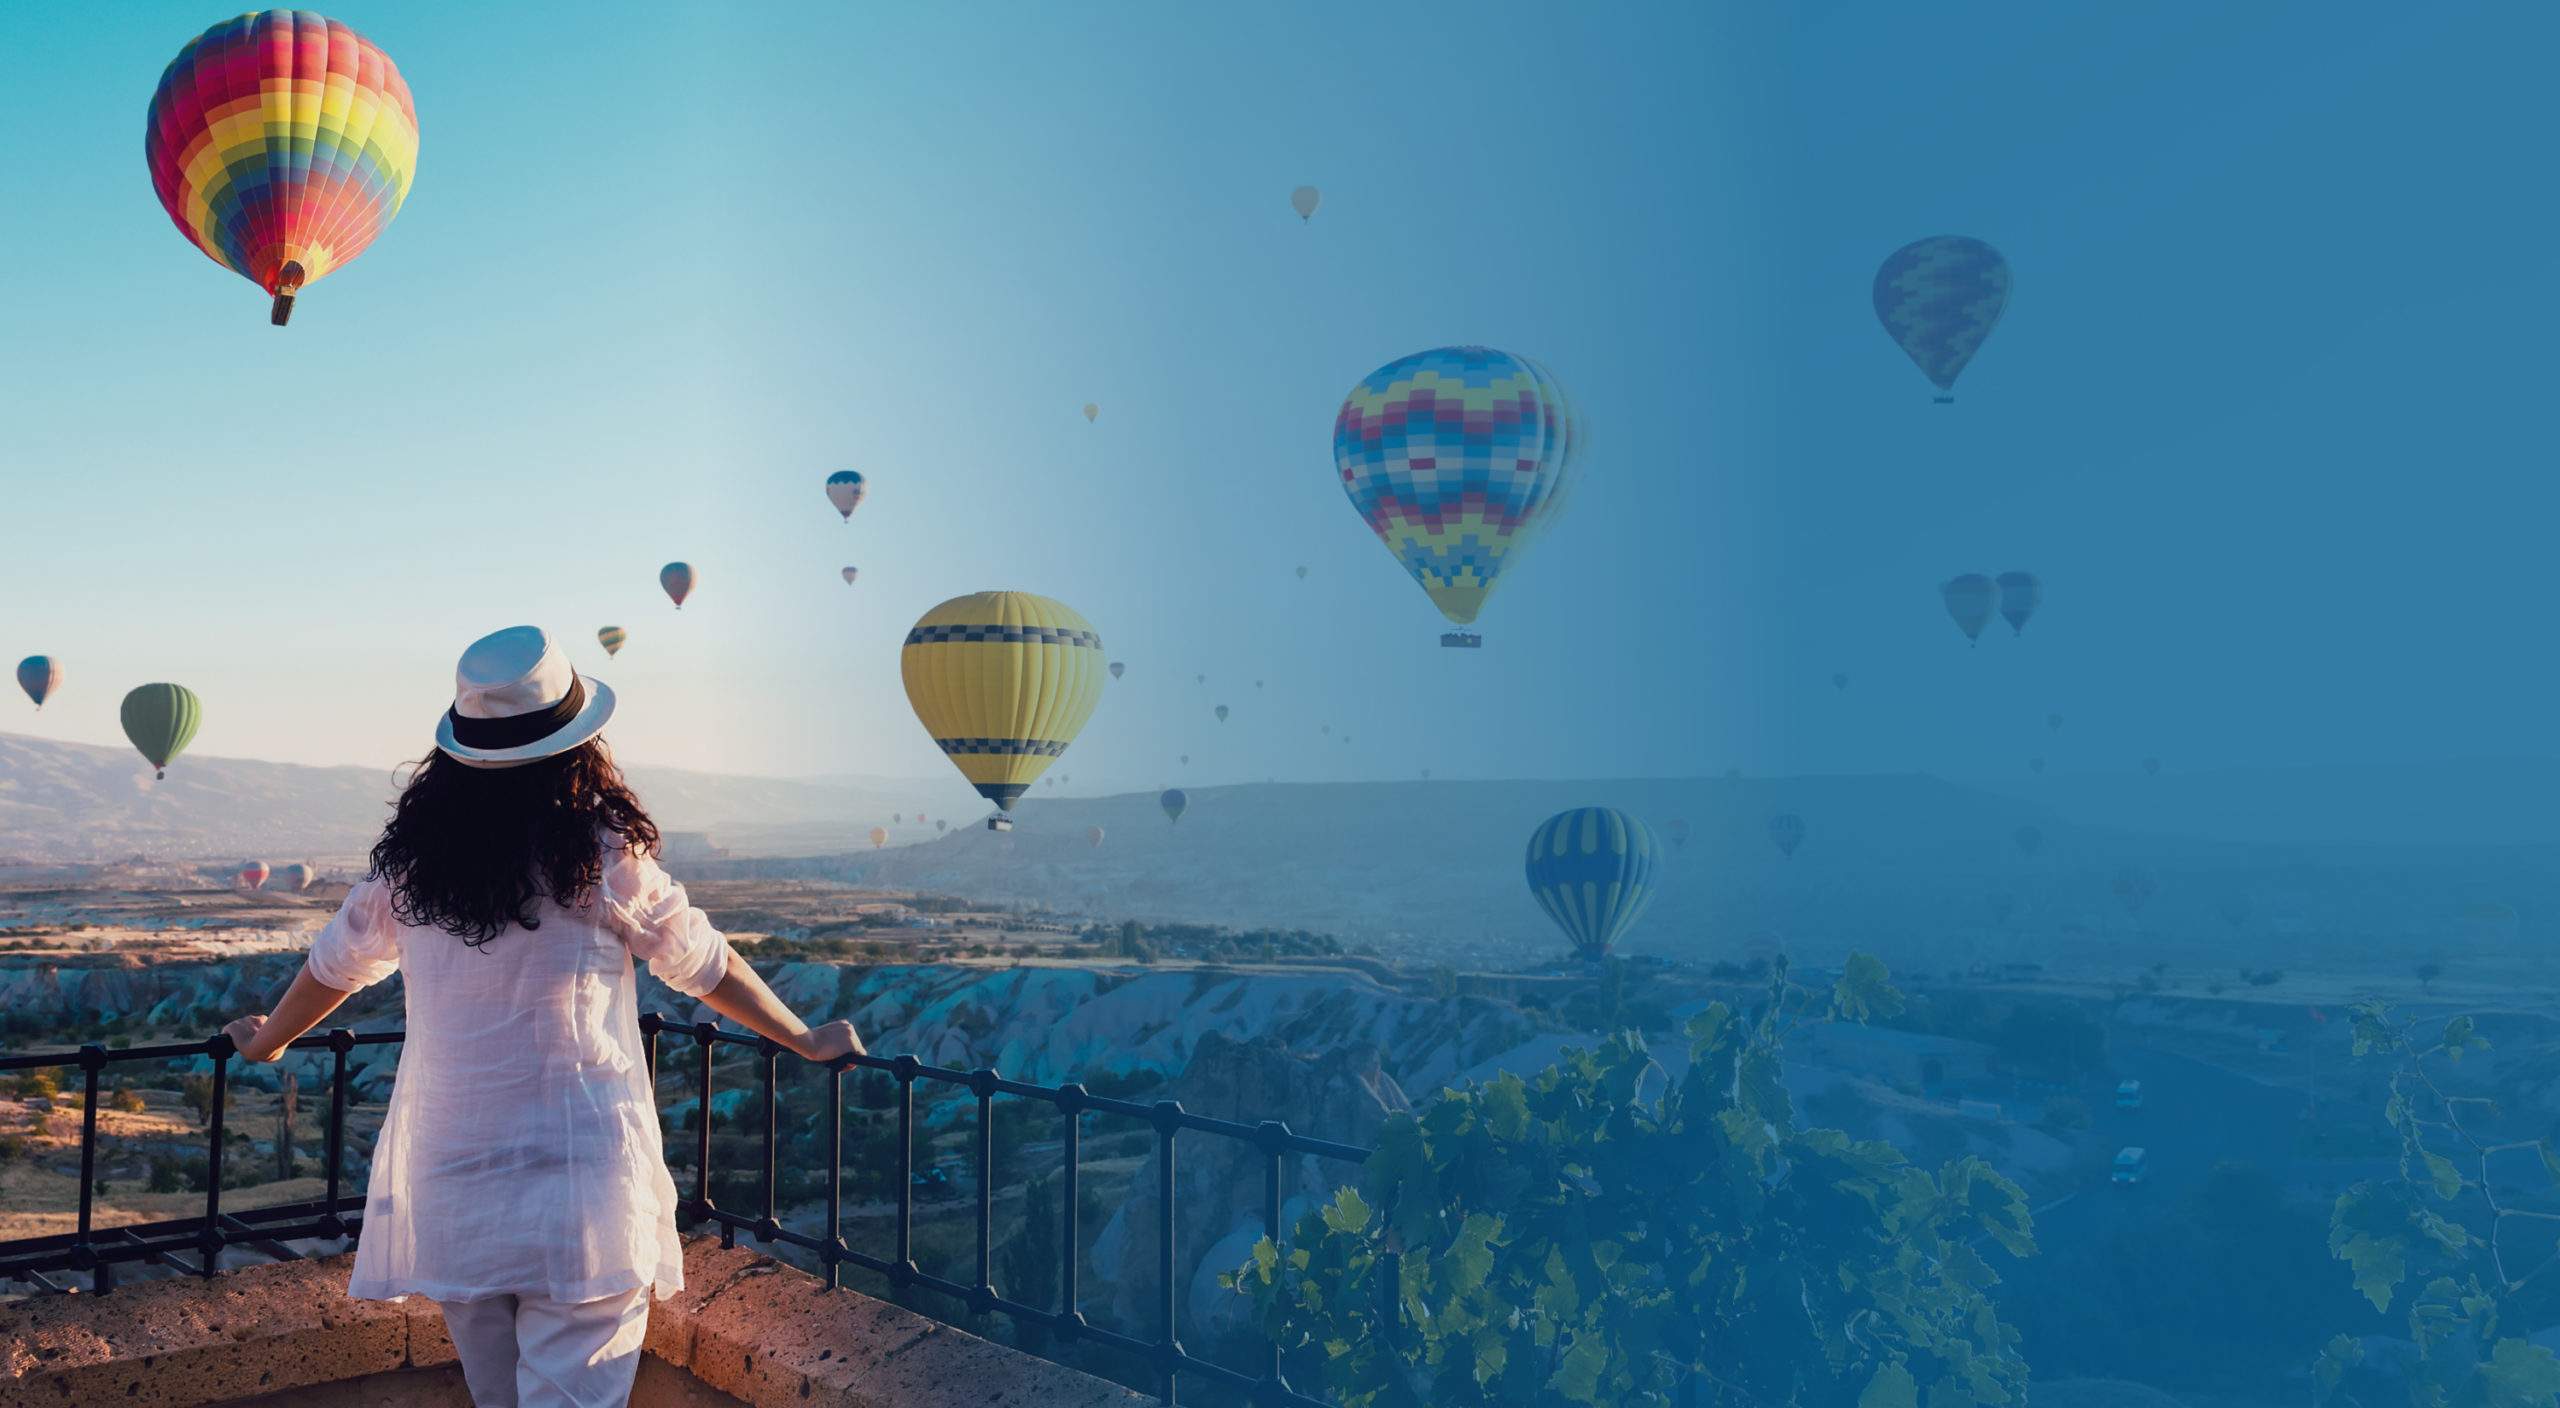 A woman watching several hot air balloons float across a wide canyon